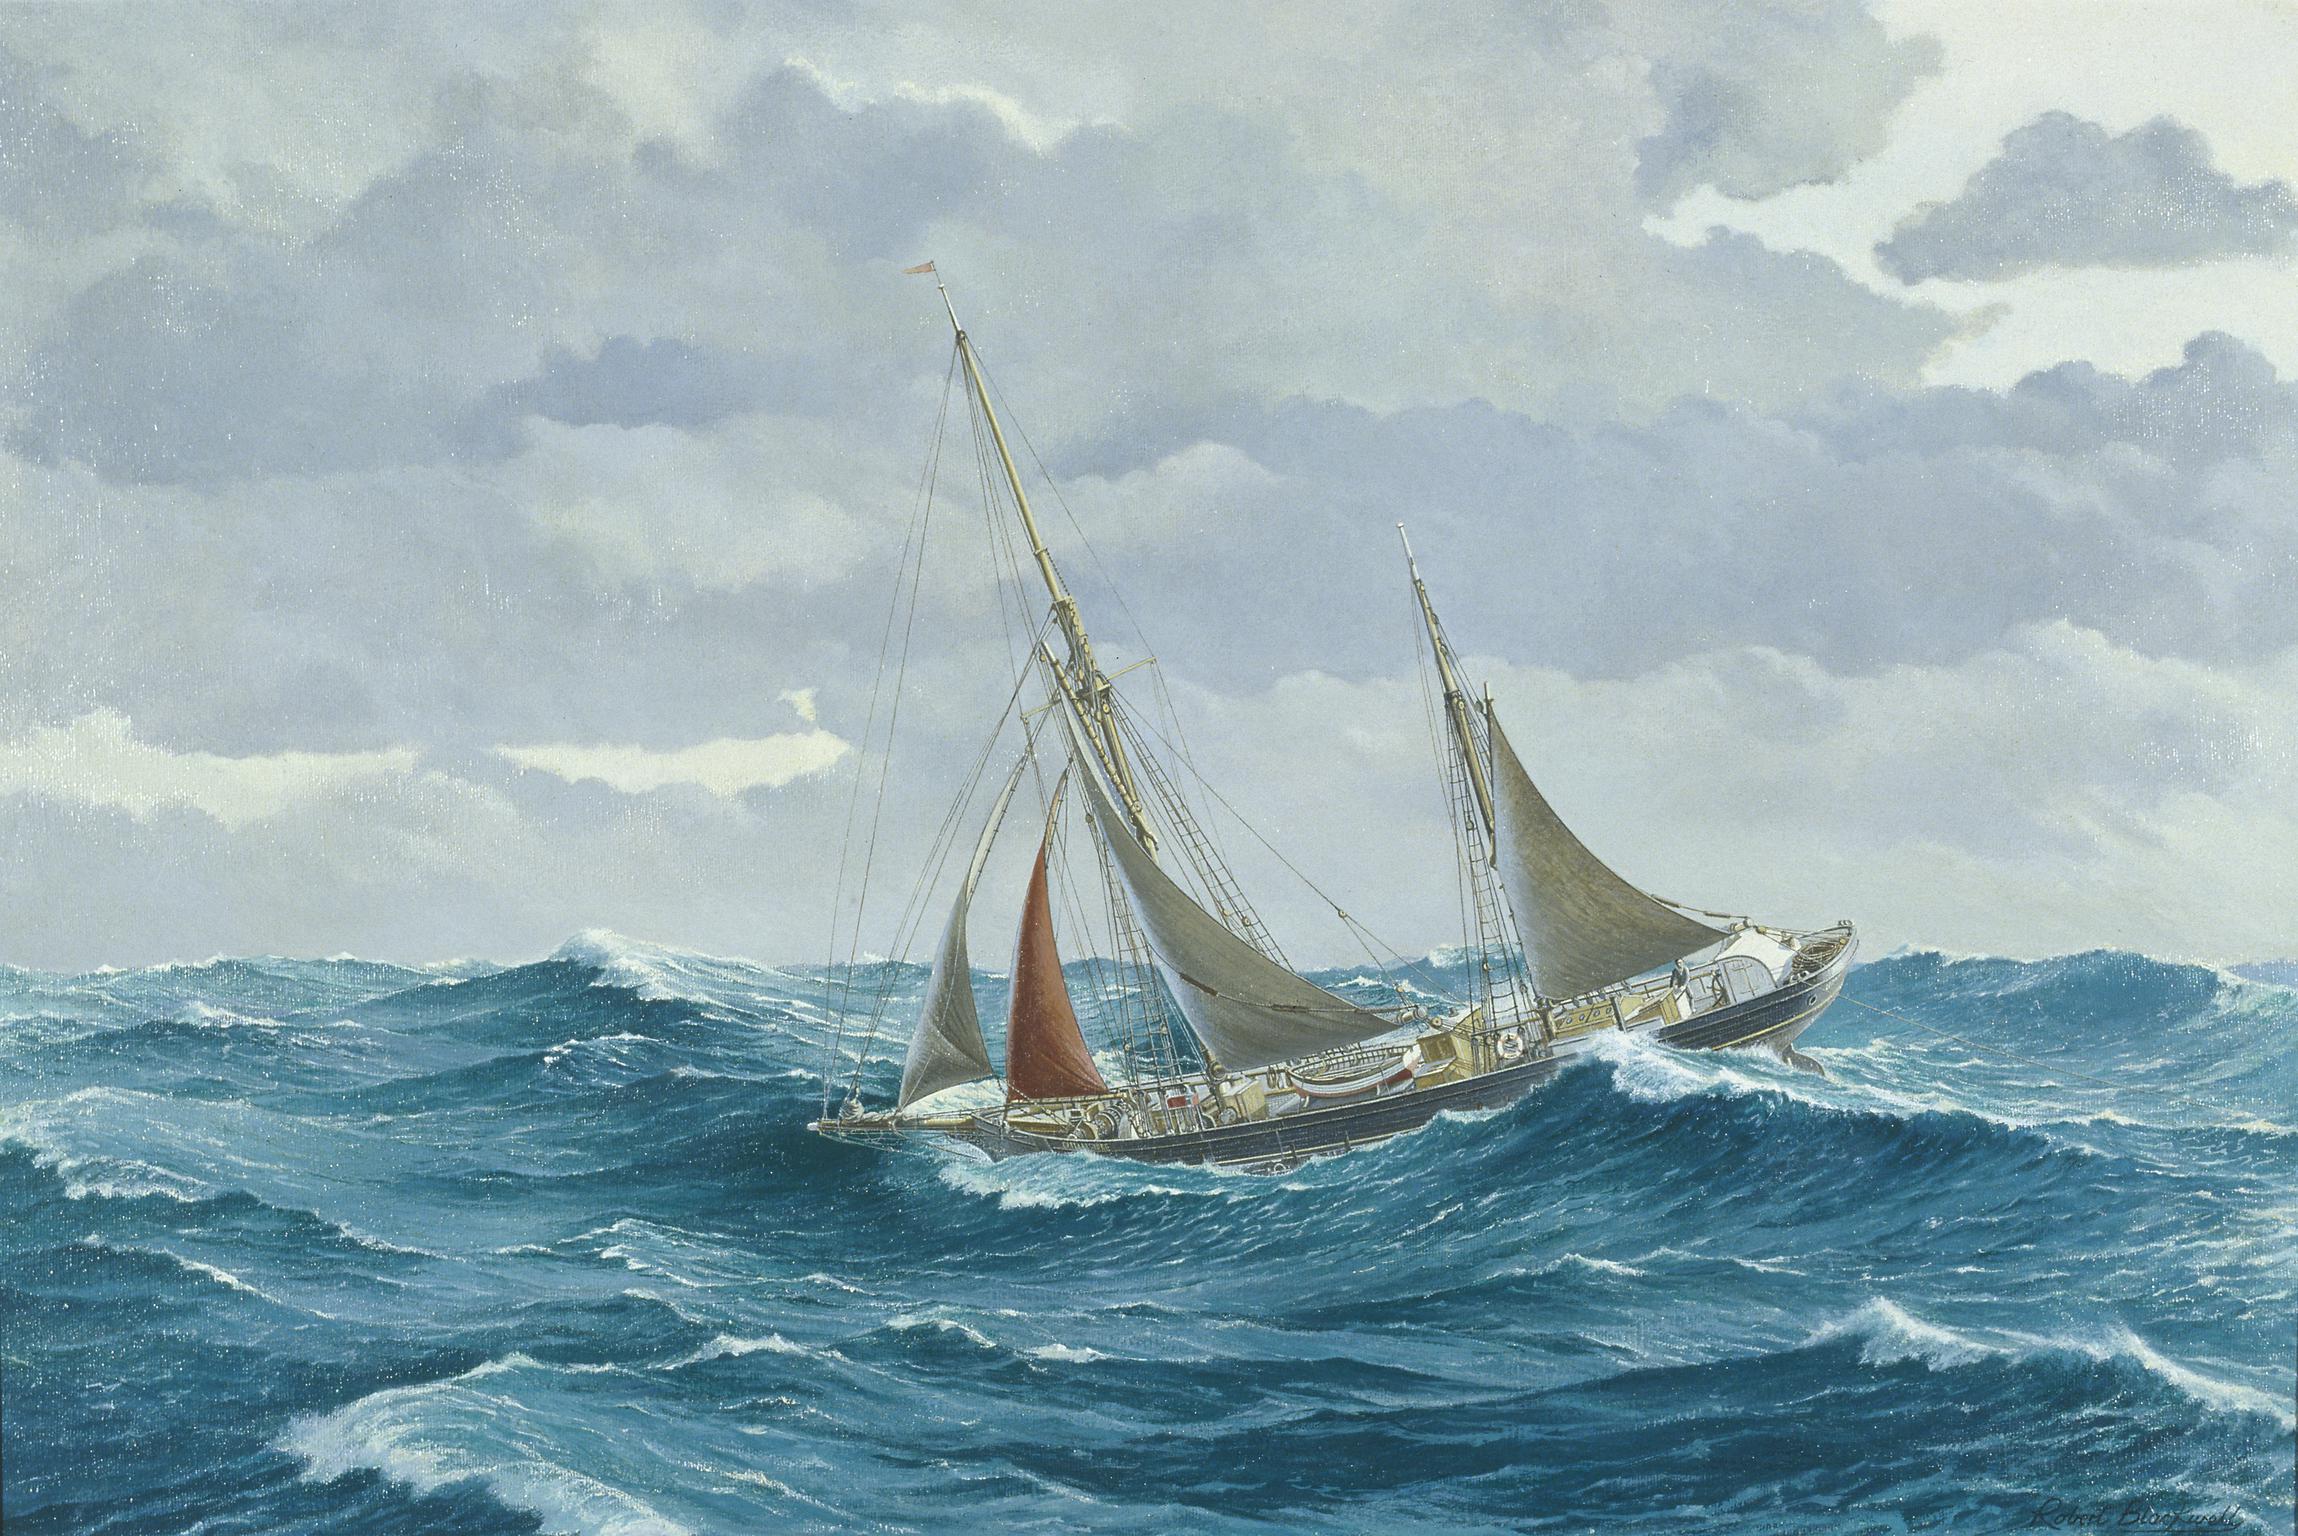 GARLANDSTONE of Milford Driving Before a Gale (painting)